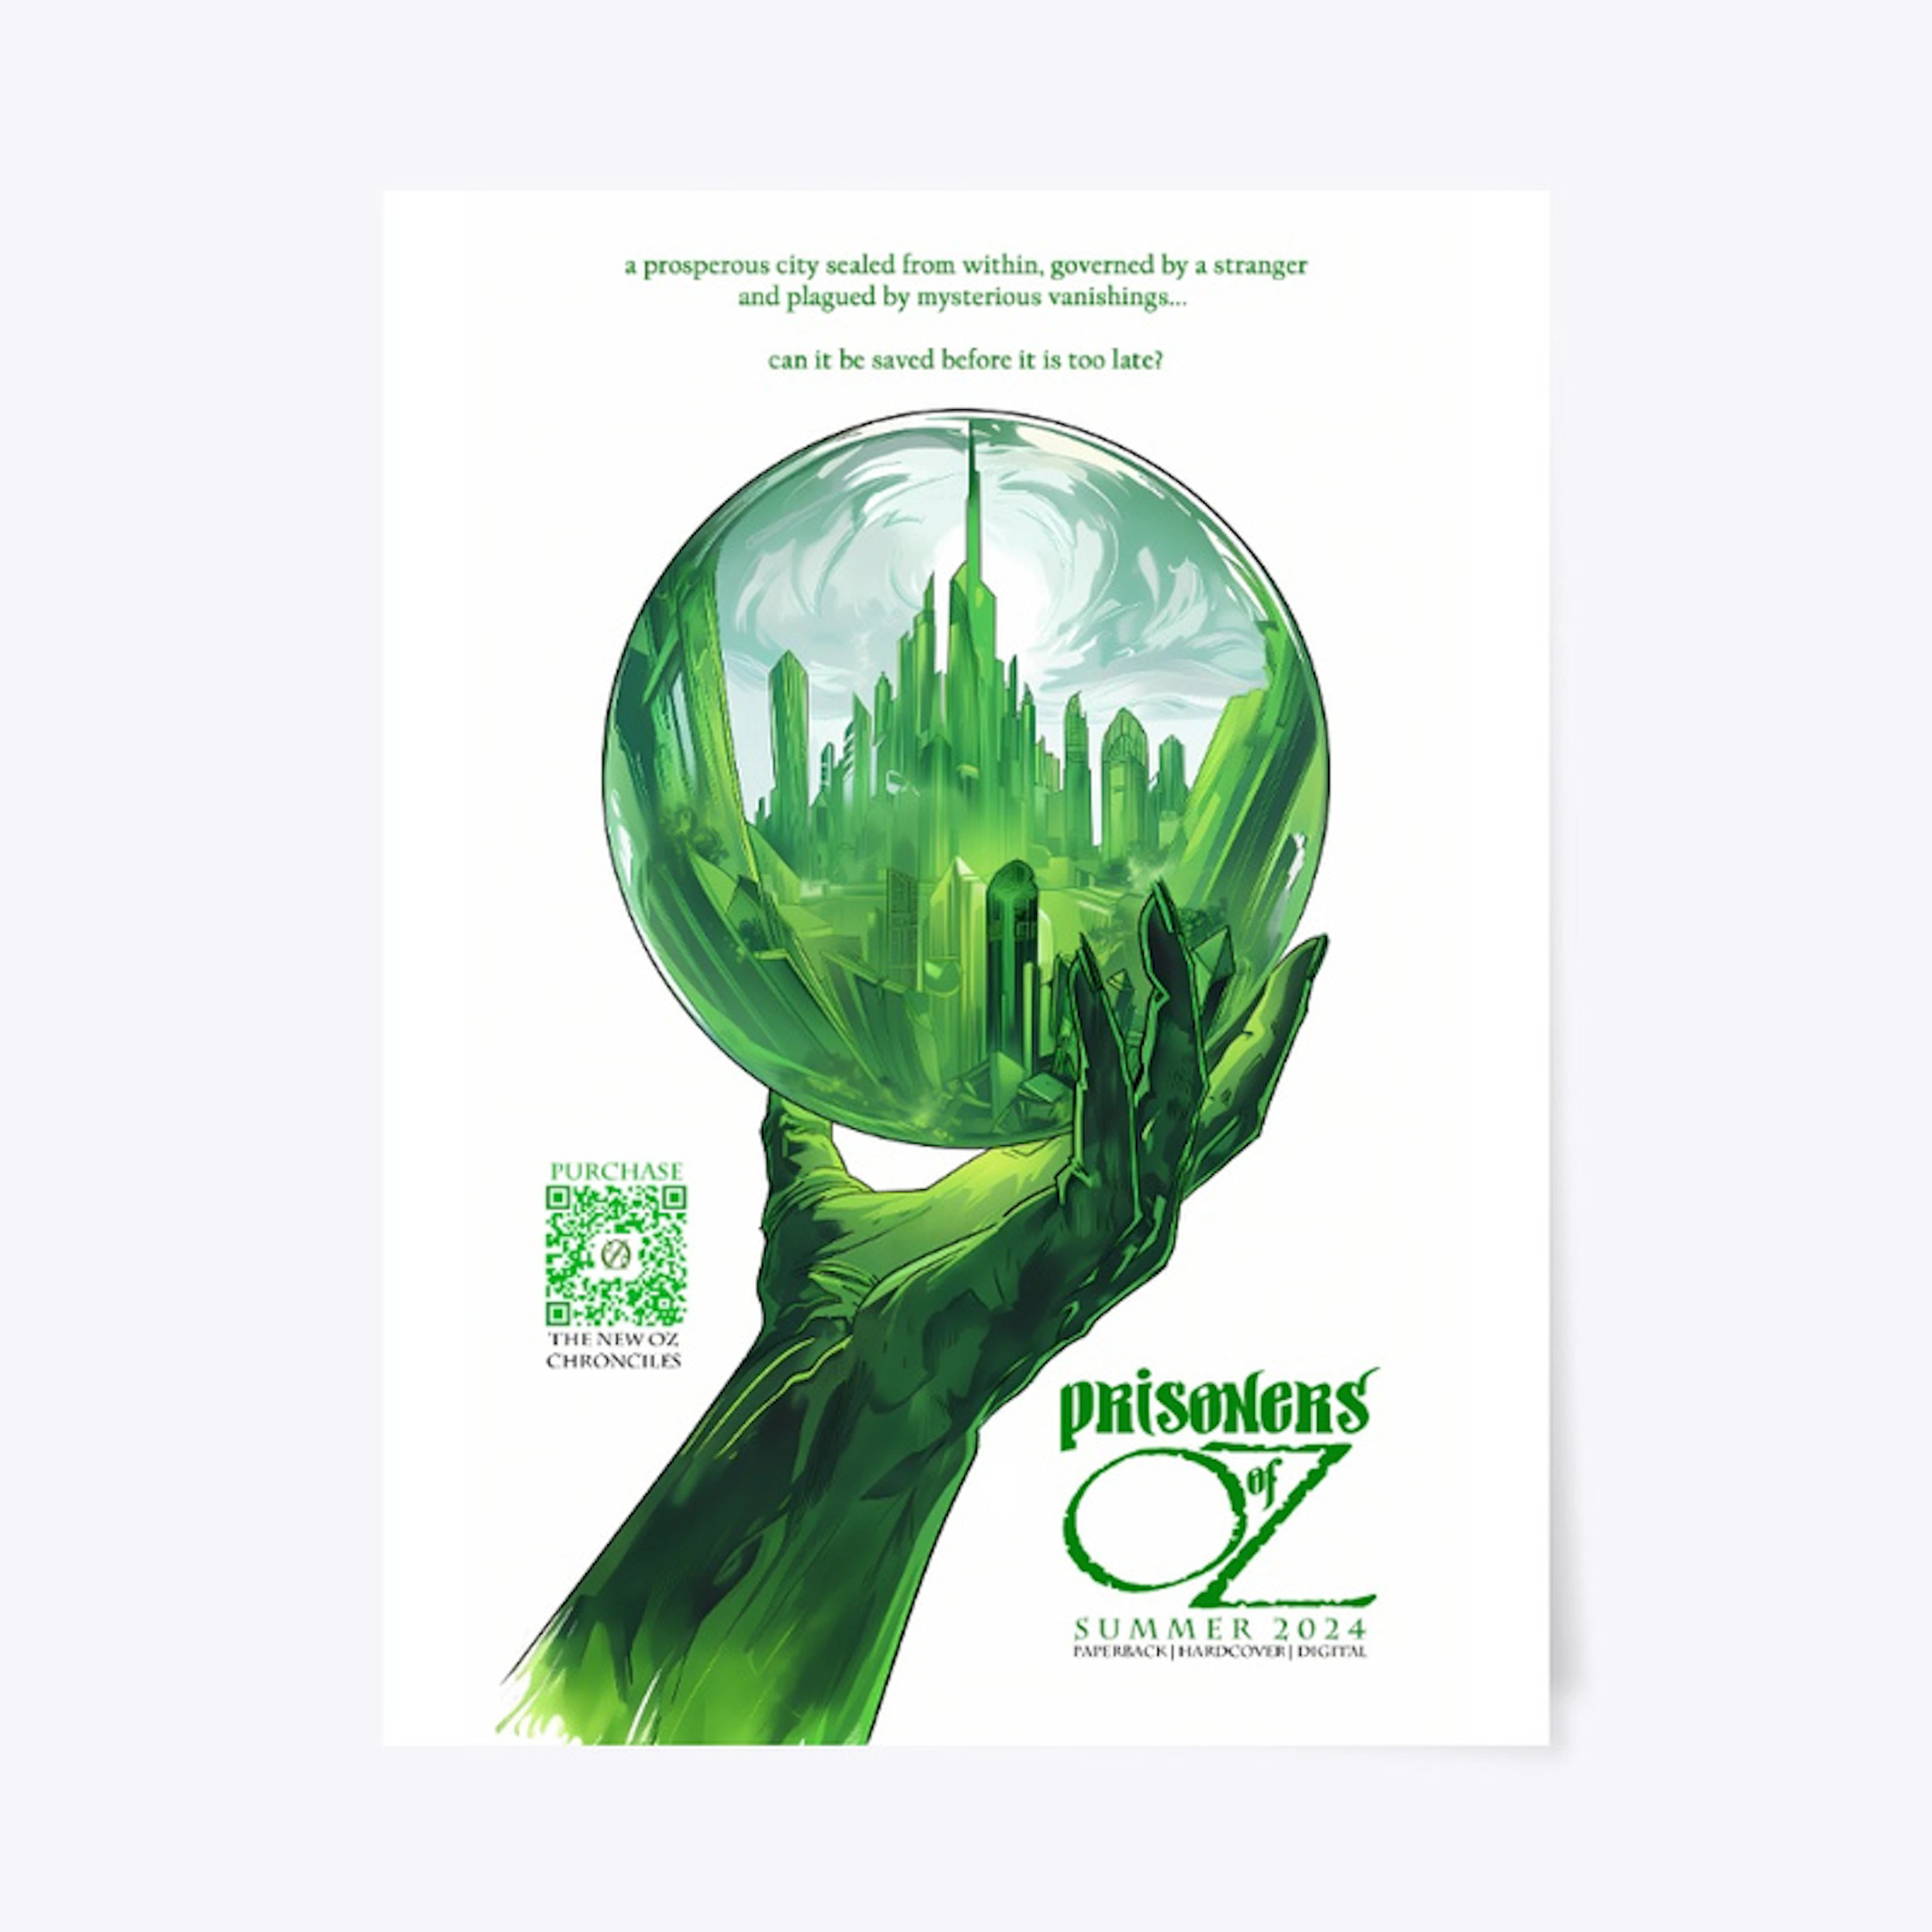 Prisoners of Oz - Official Poster